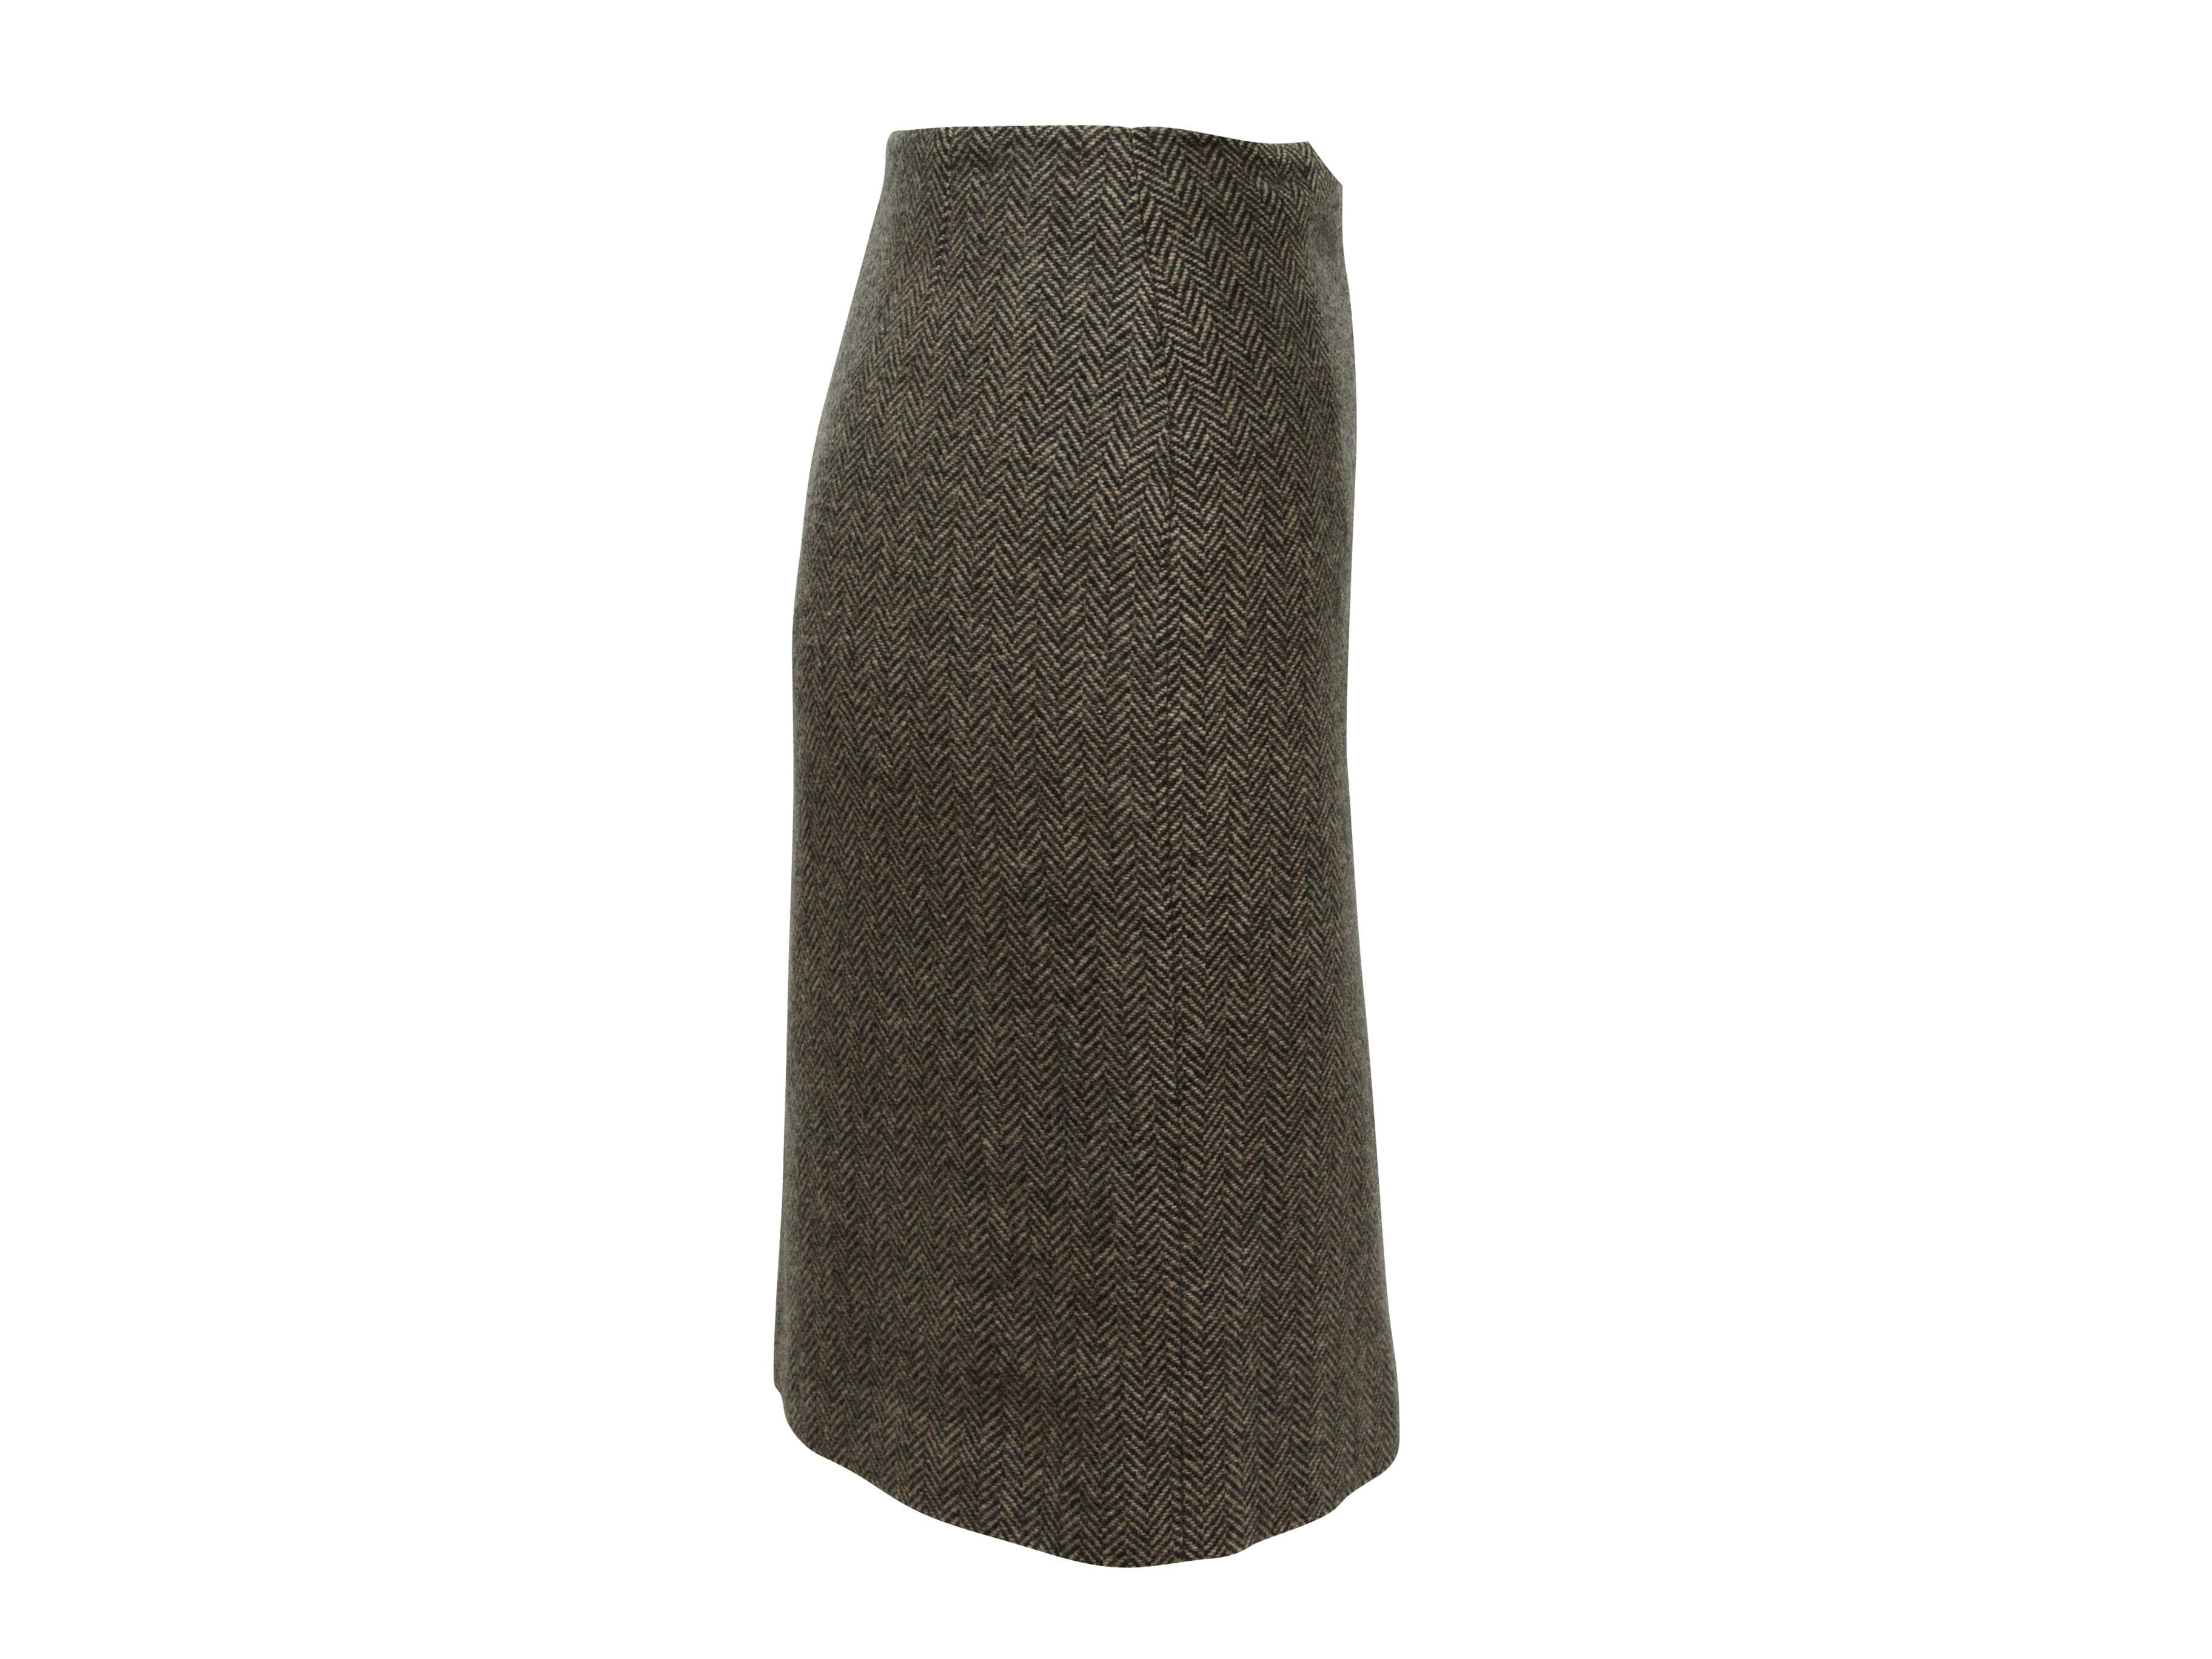 Product details: Vintage grey cashmere herringbone skirt suit and matching shawl by Hermes. Jacket features crew neck, black knit trim and zip closure at front. Skirt features brown leather trim and buckle closure at waist. Shawl features fringe